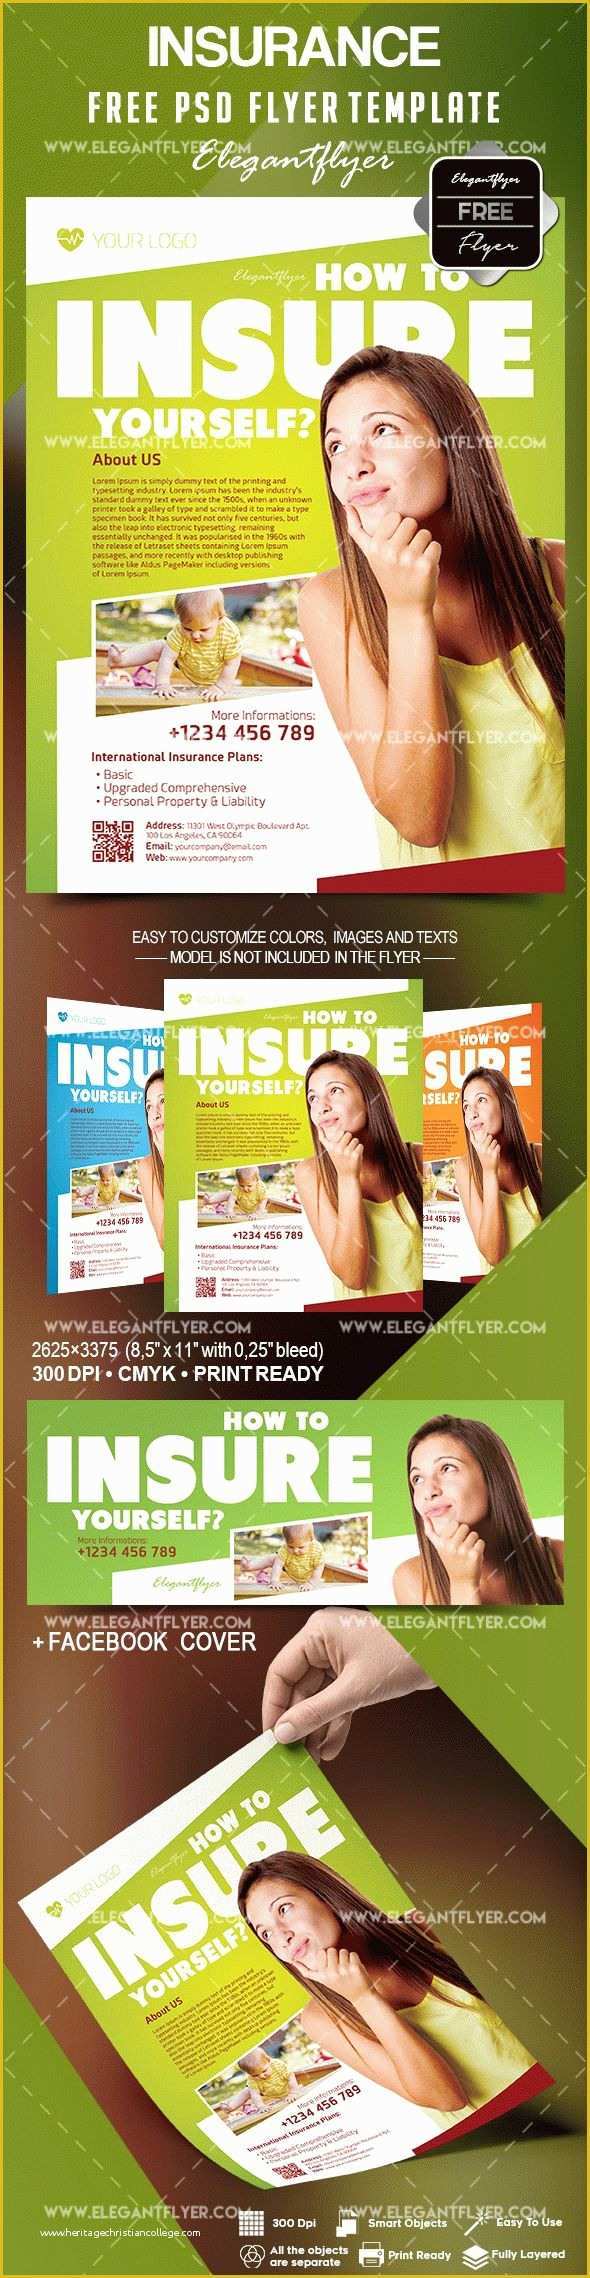 Insurance Flyer Templates Free Of Free Insurance Flyer Template – by Elegantflyer